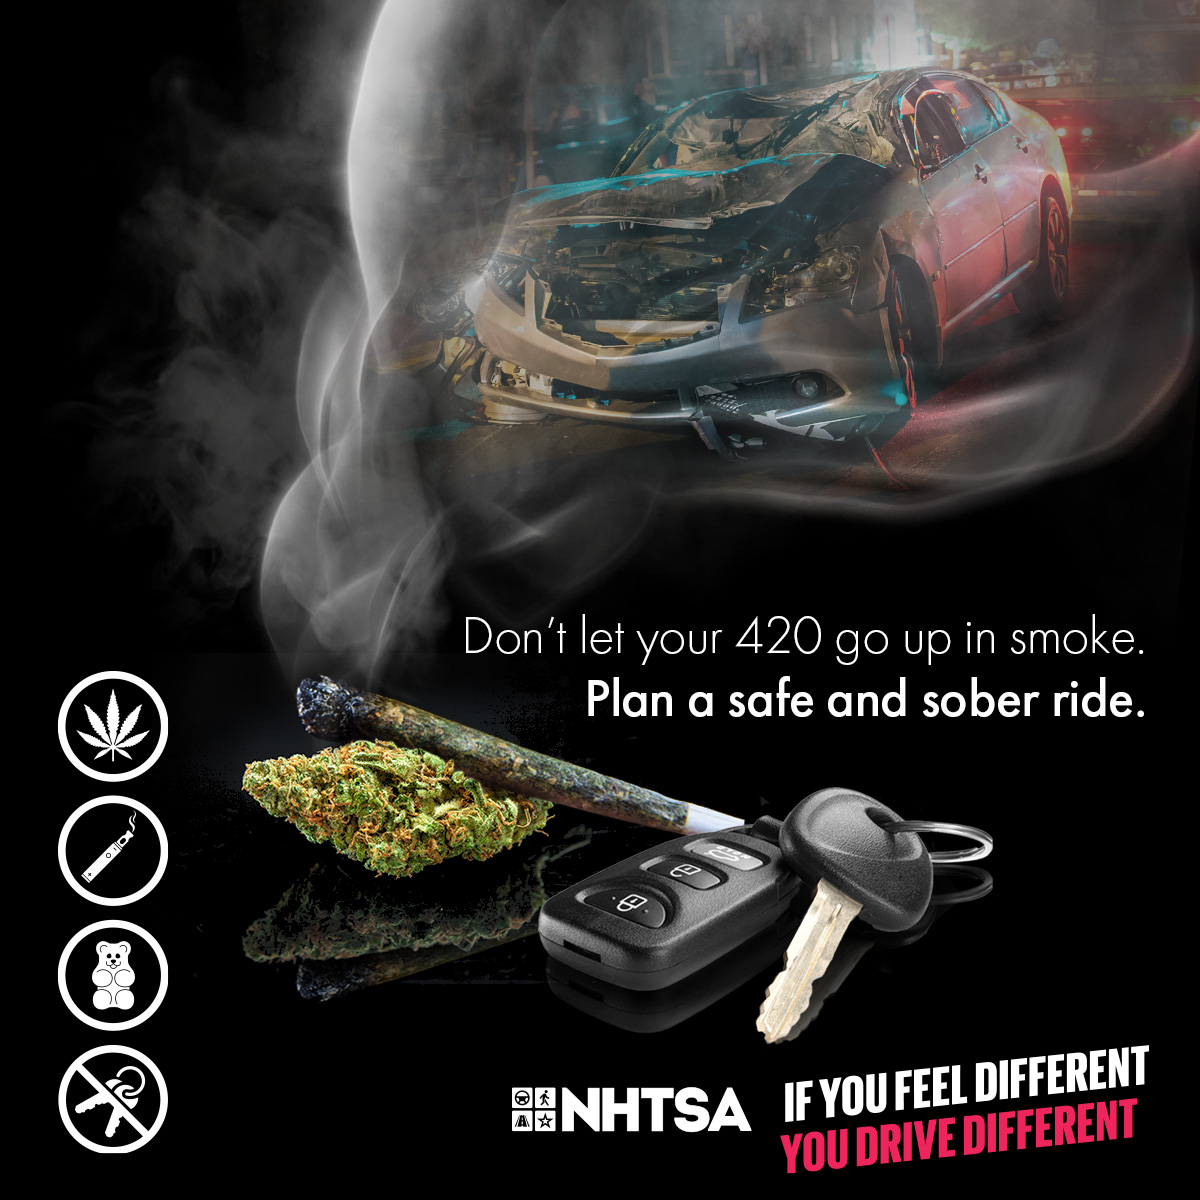 Don’t let your 420 go up in smoke. Plan a safe and sober ride.  If you feel different, you drive different.